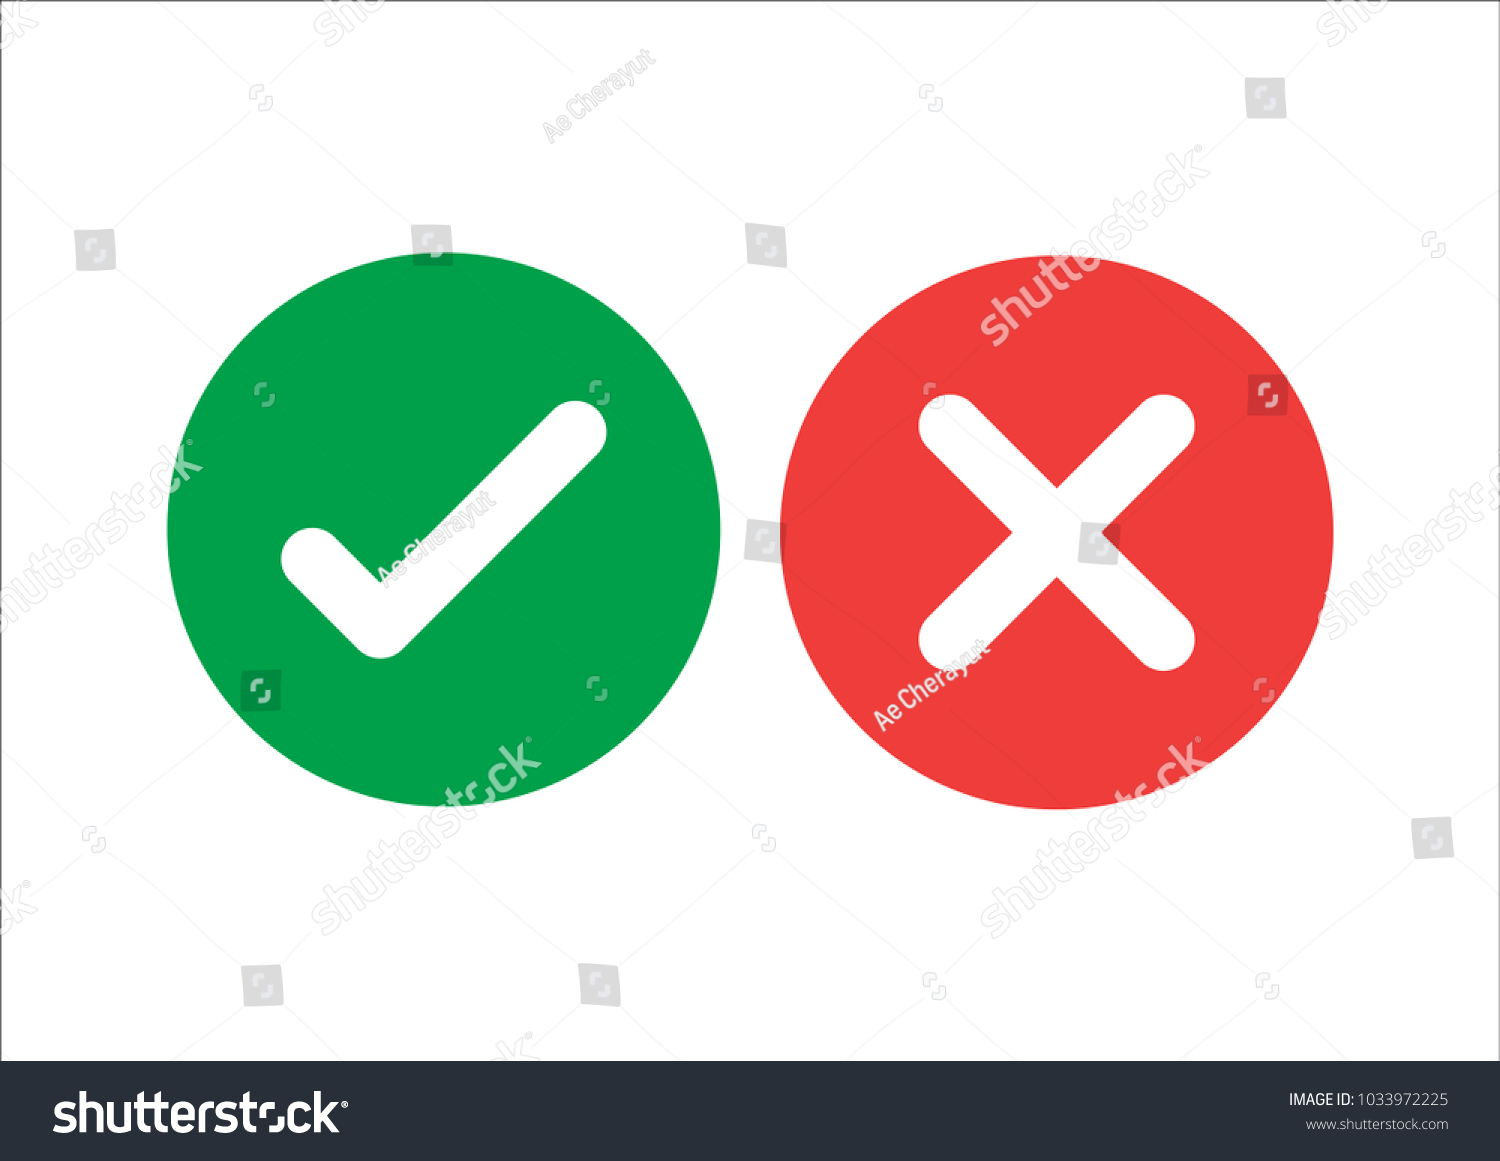 Checkmark icons set. Tick and cross sign. Green check mark and red X cross icon isolated on white background. Simple marks graphic flat design. Circle shape YES and NO button. Vector illustration. #1033972225